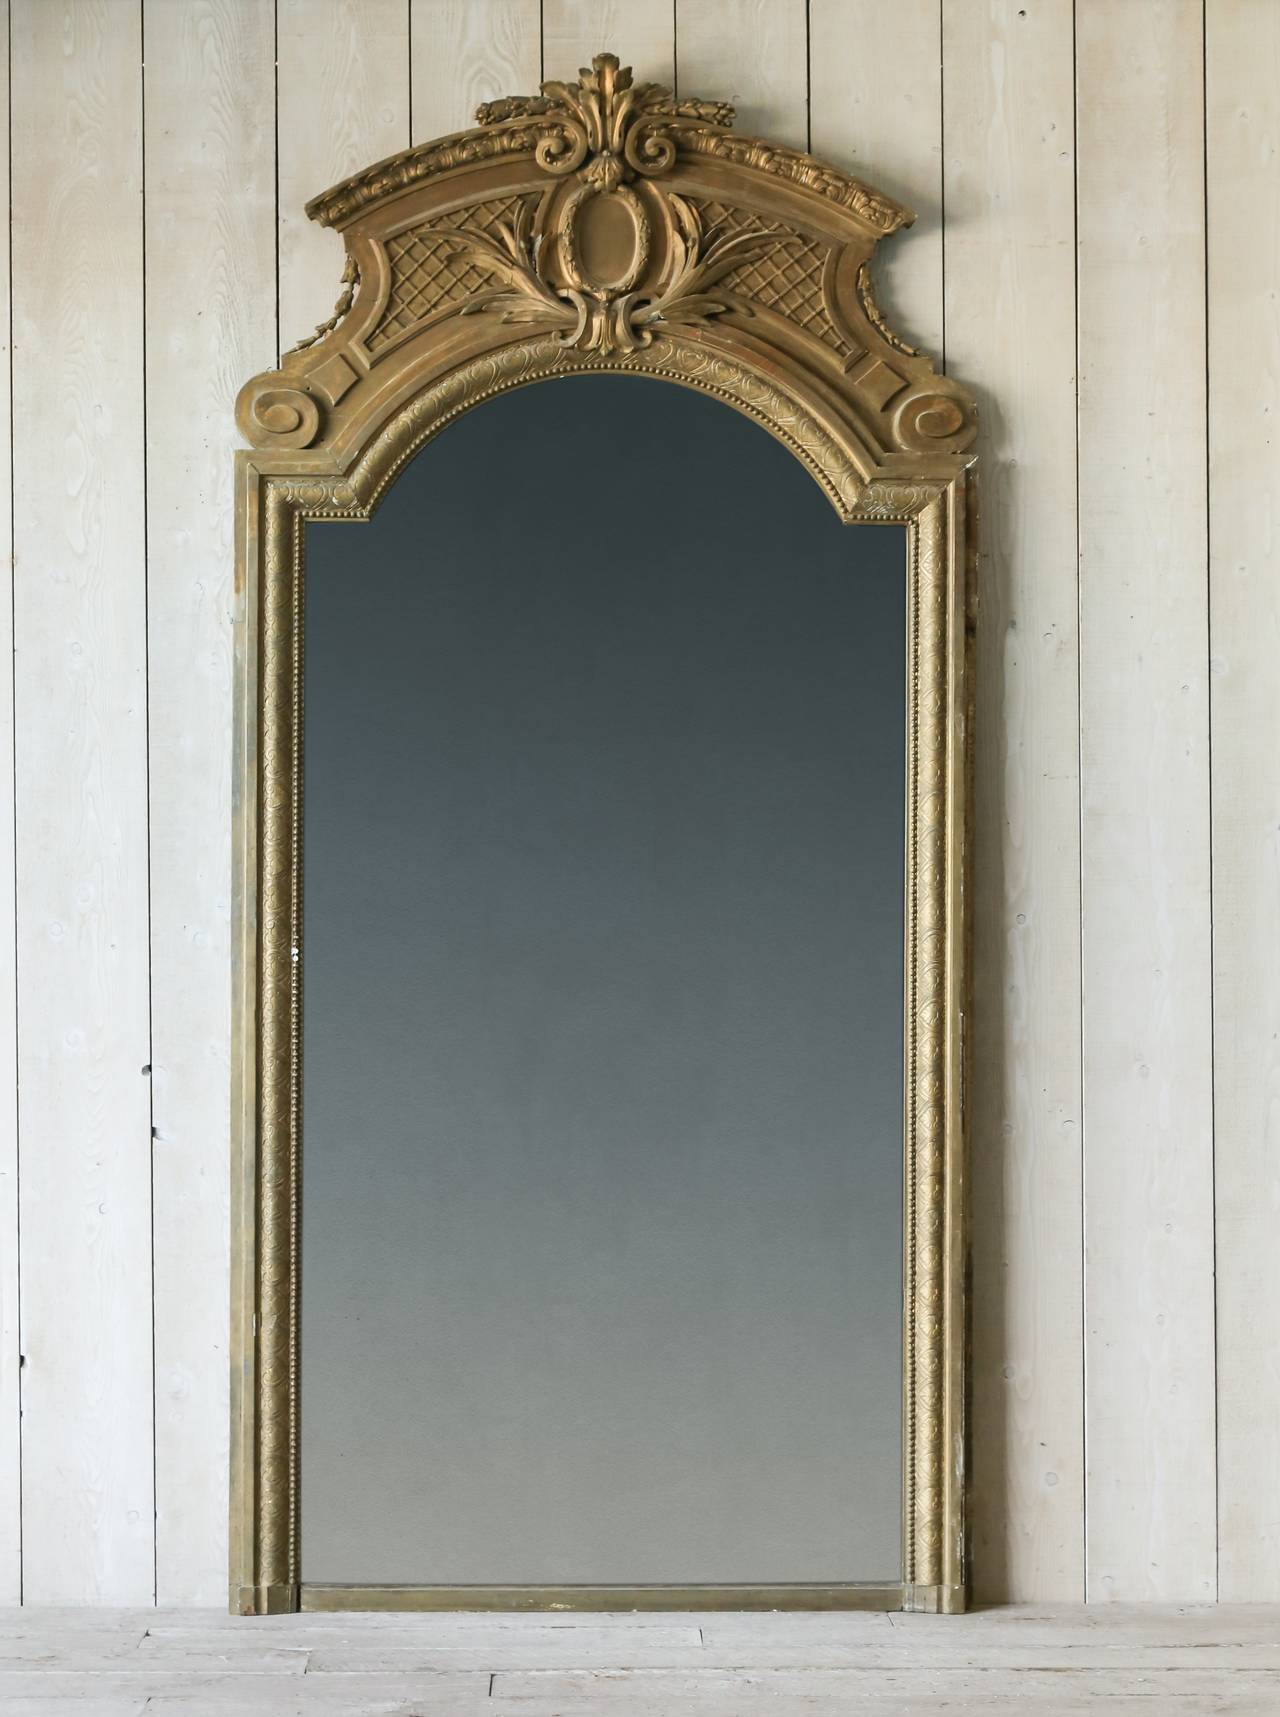 Exceptional antique ballroom mirror finished in a deep gilt, its crest adorned with a basket weave, wreath and foliage motif. The elegant, yet understated style and finish of this mirror make this piece ahead of its time. This would make a striking